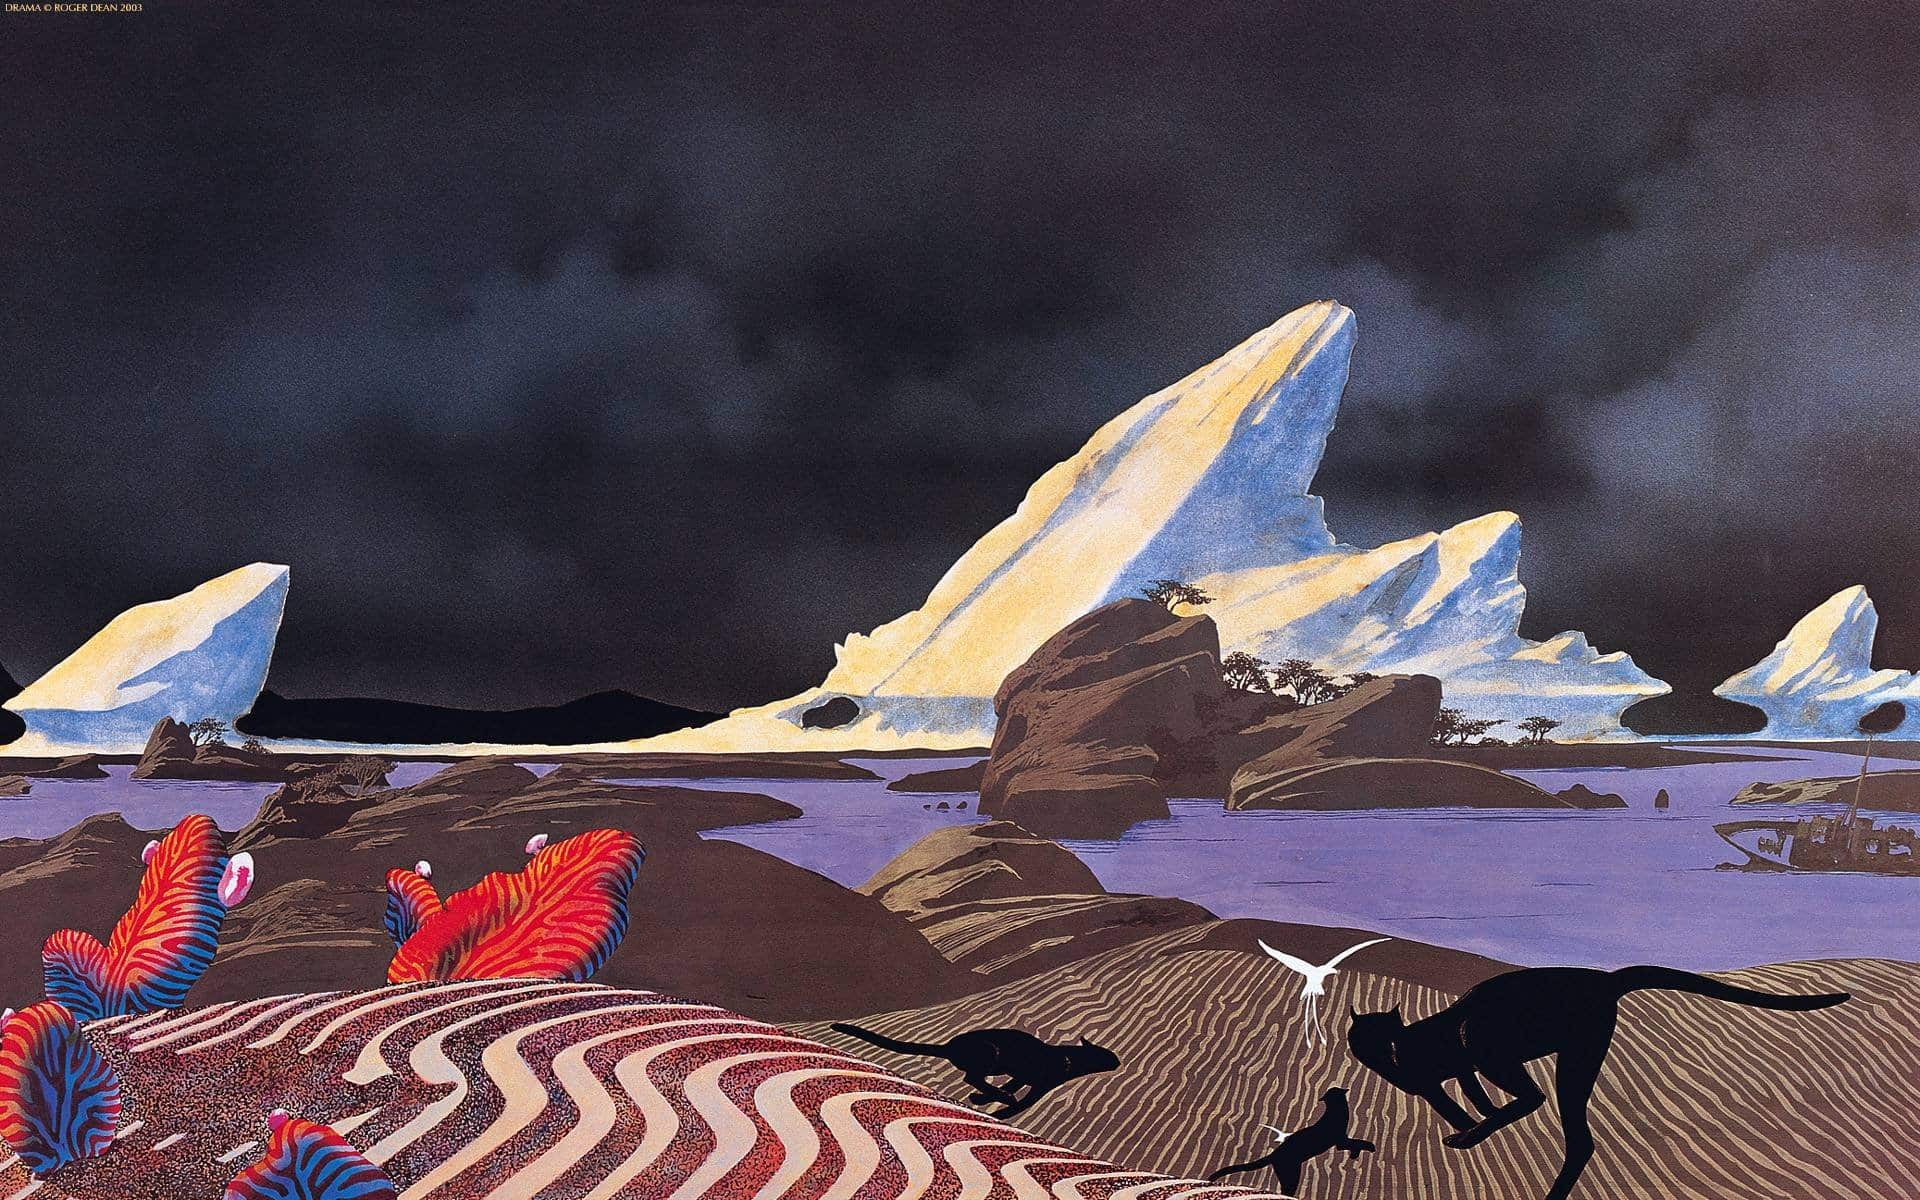 Roger Dean Album Covers Yes